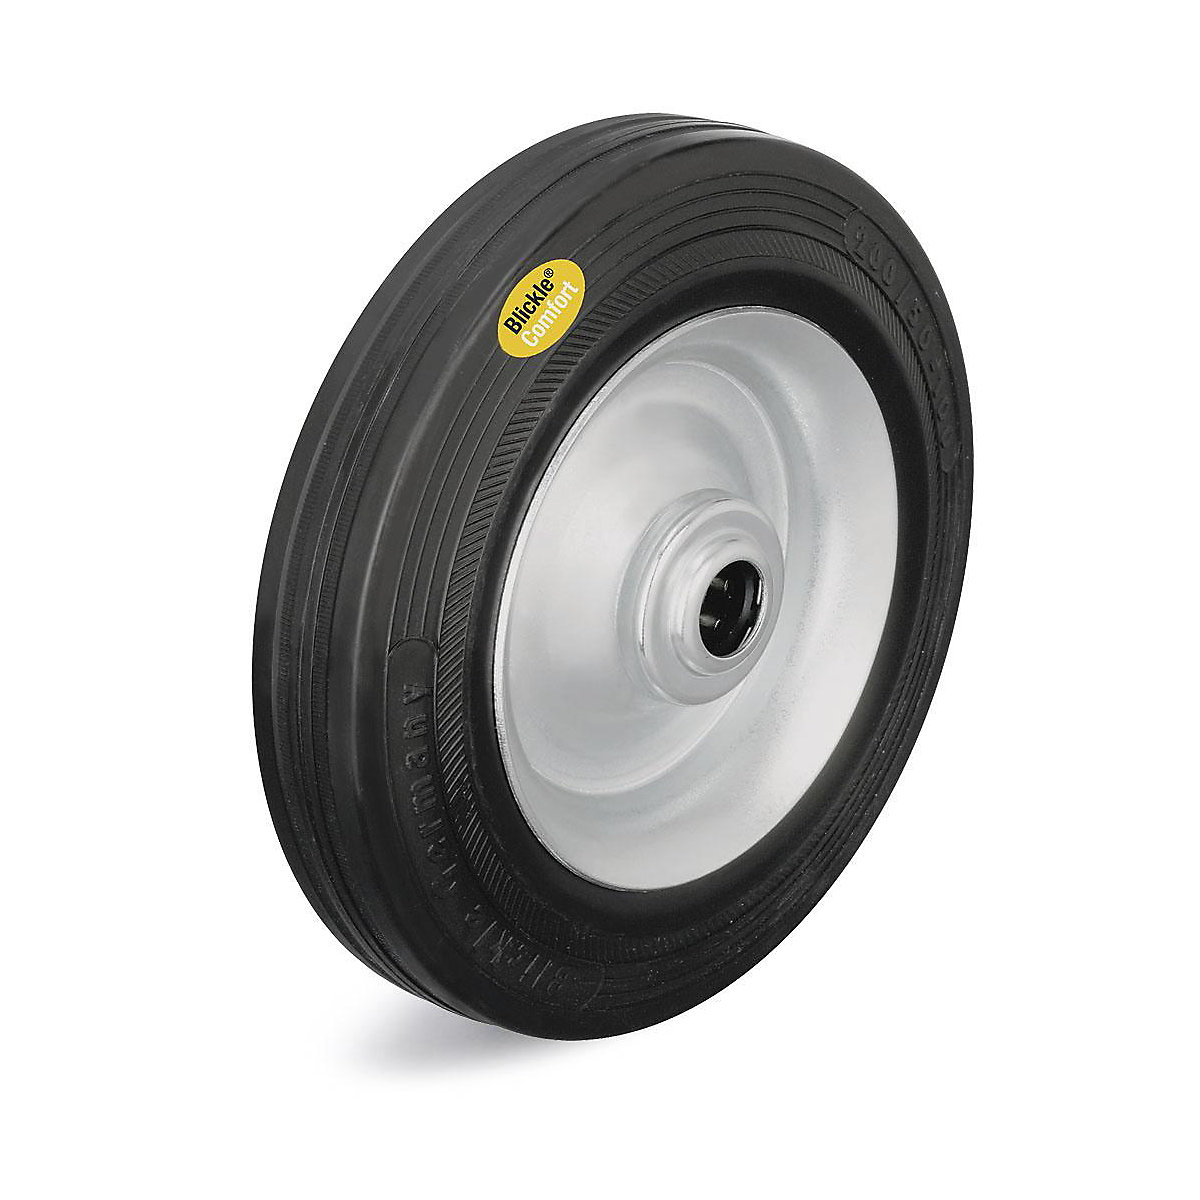 Two component solid rubber tyre